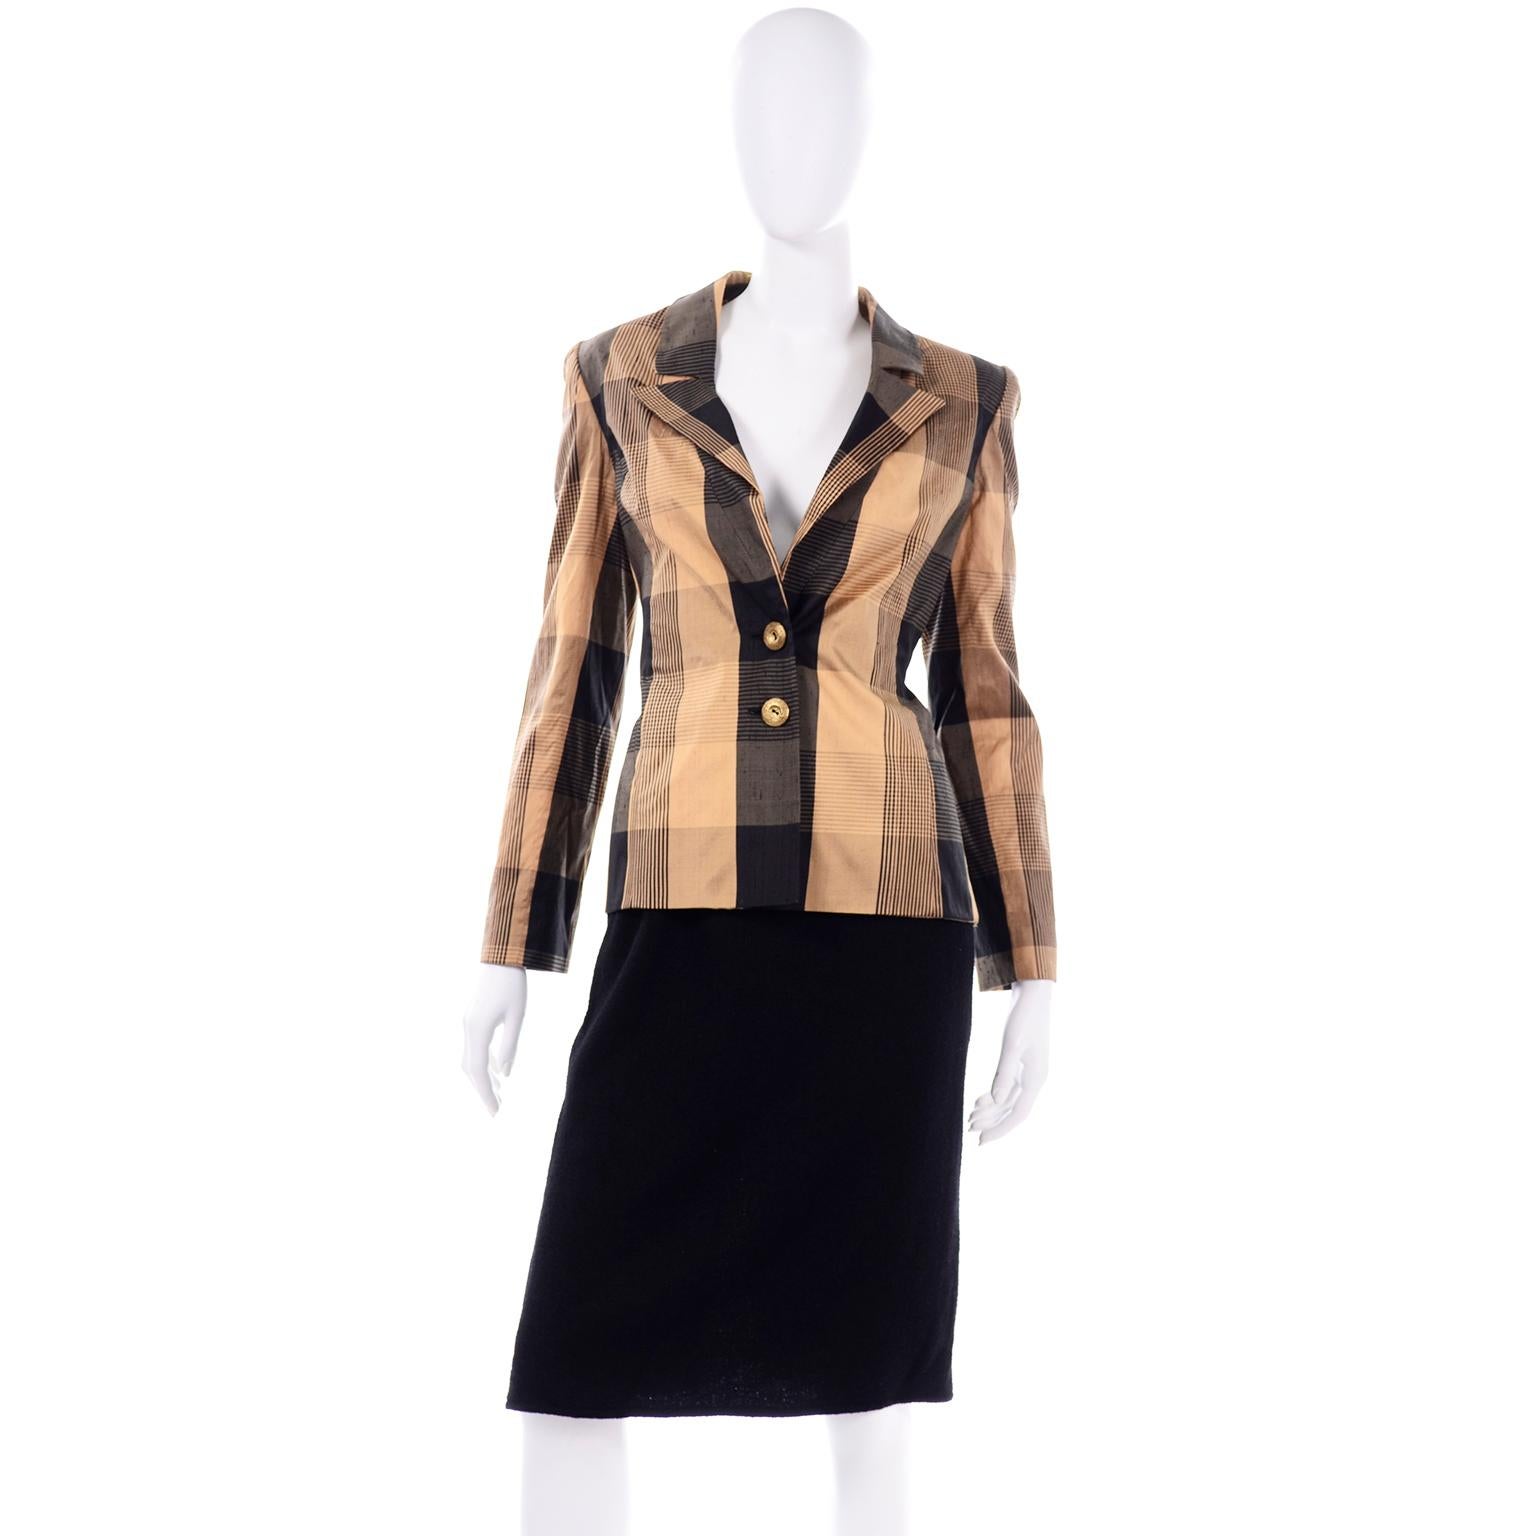 This vintage Valentino Boutique Collectible skirt suit ensemble comes with 2 different blazer options. This includes a vintage Valentino black boucle wool skirt and both a black boucle wool blazer and a coordinating black and gold plaid silk blazer.